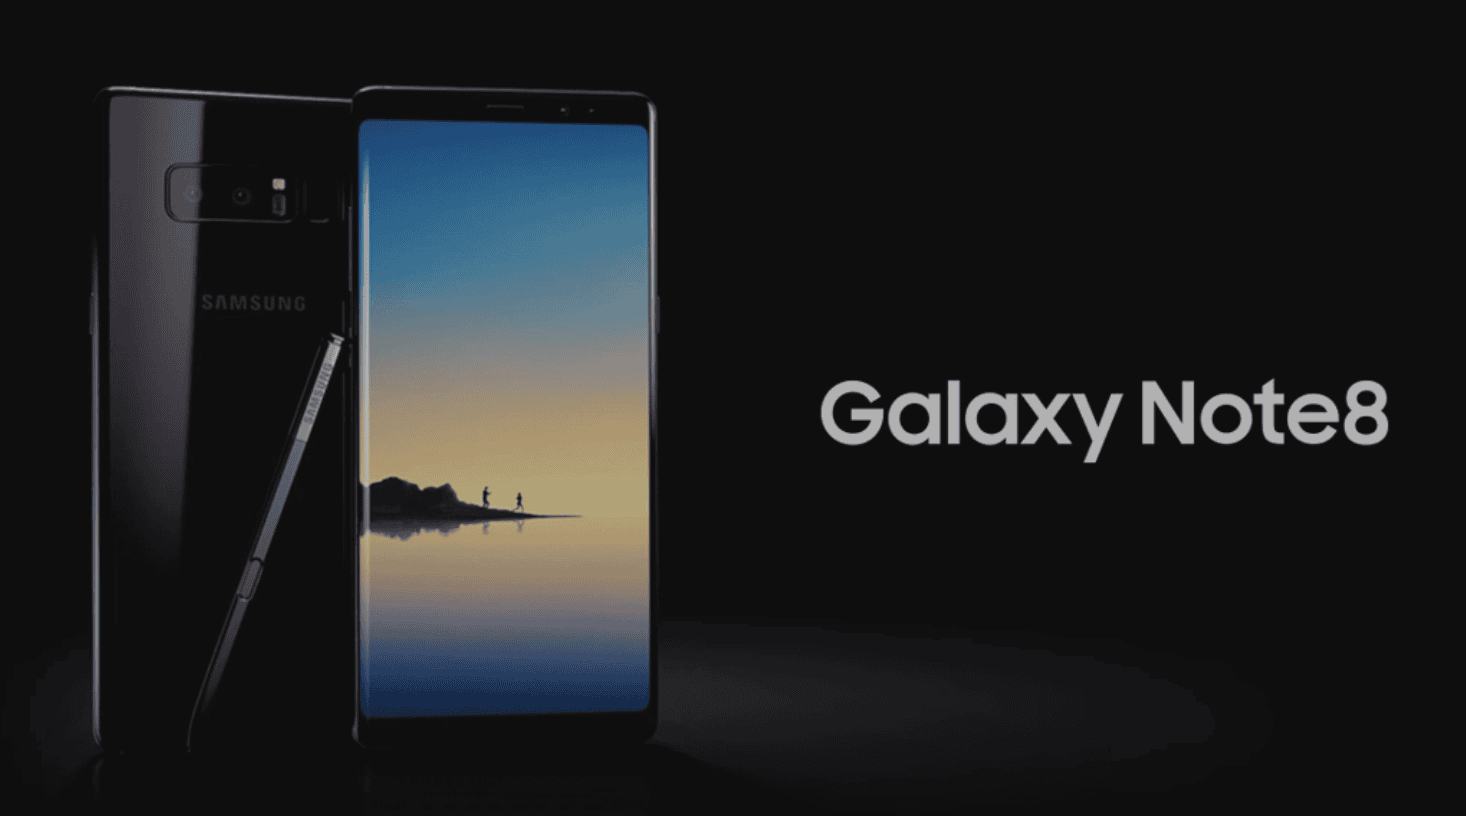 First Android Pie (9.0.0) Update Released for Samsung Galaxy Note 8